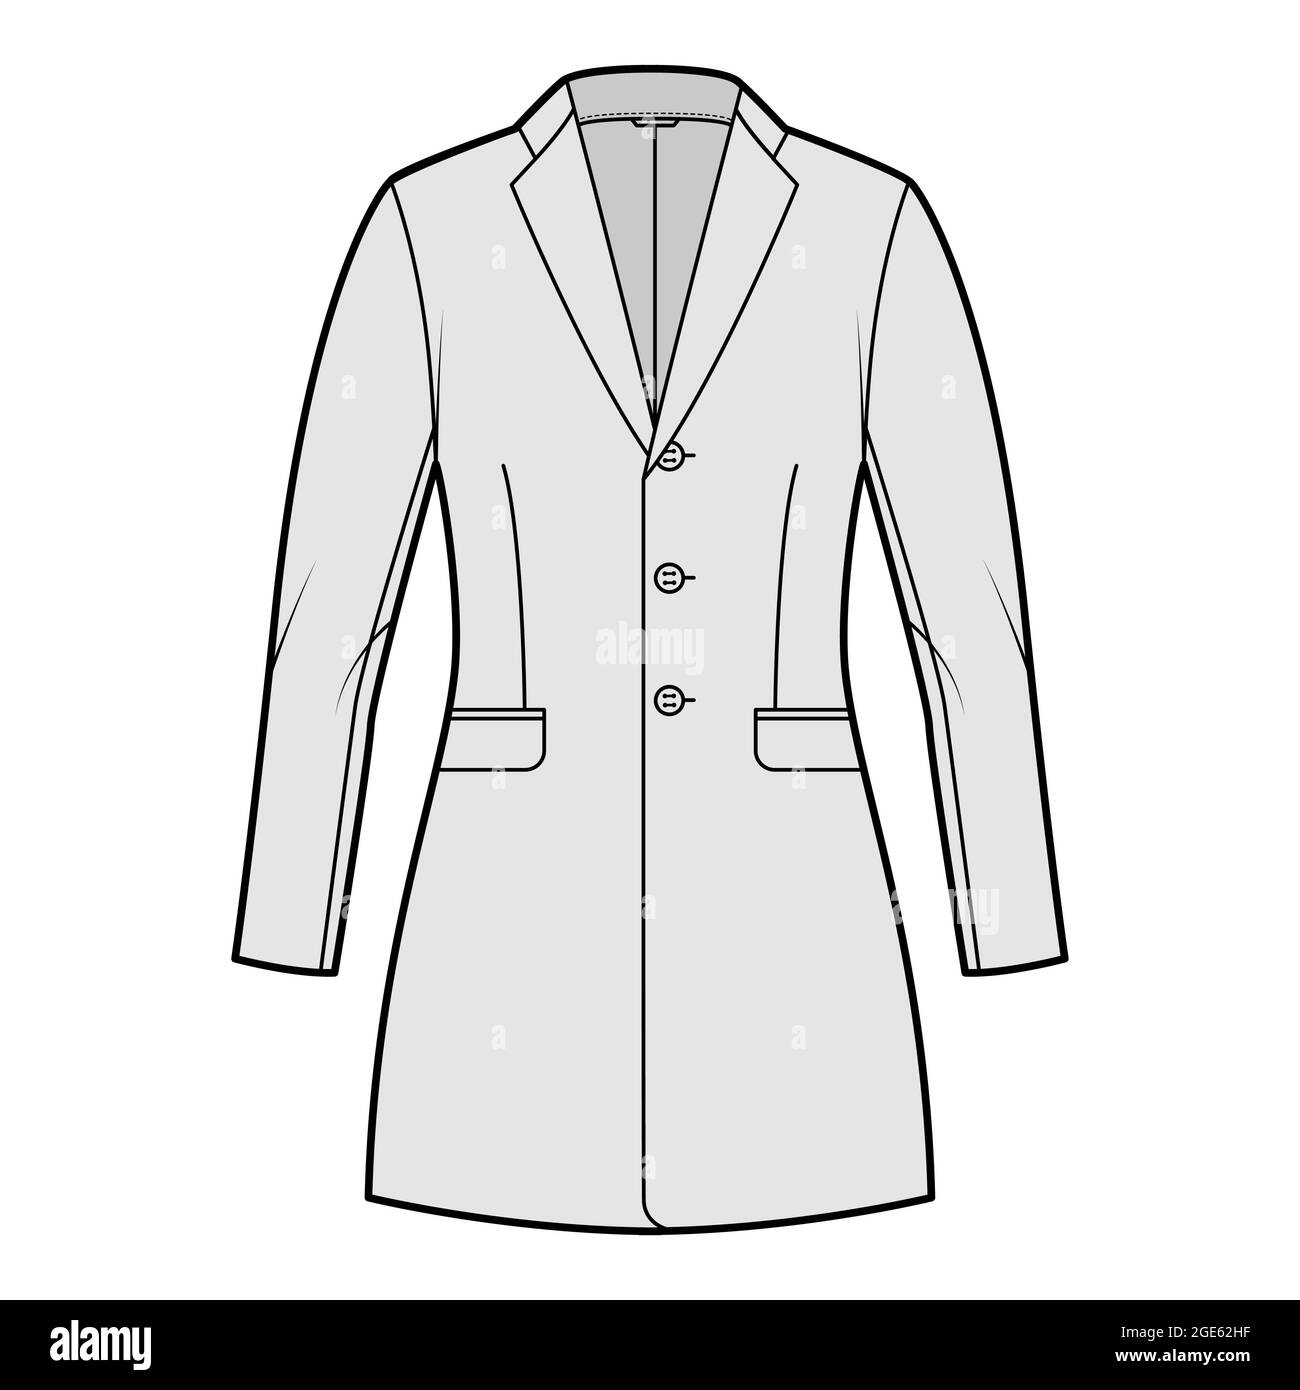 Jacket fitted Blazer structured suit technical fashion illustration with single breasted, long sleeves, flap pockets, fingertip length. Flat apparel coat template front, grey color. Women, men CAD Stock Vector